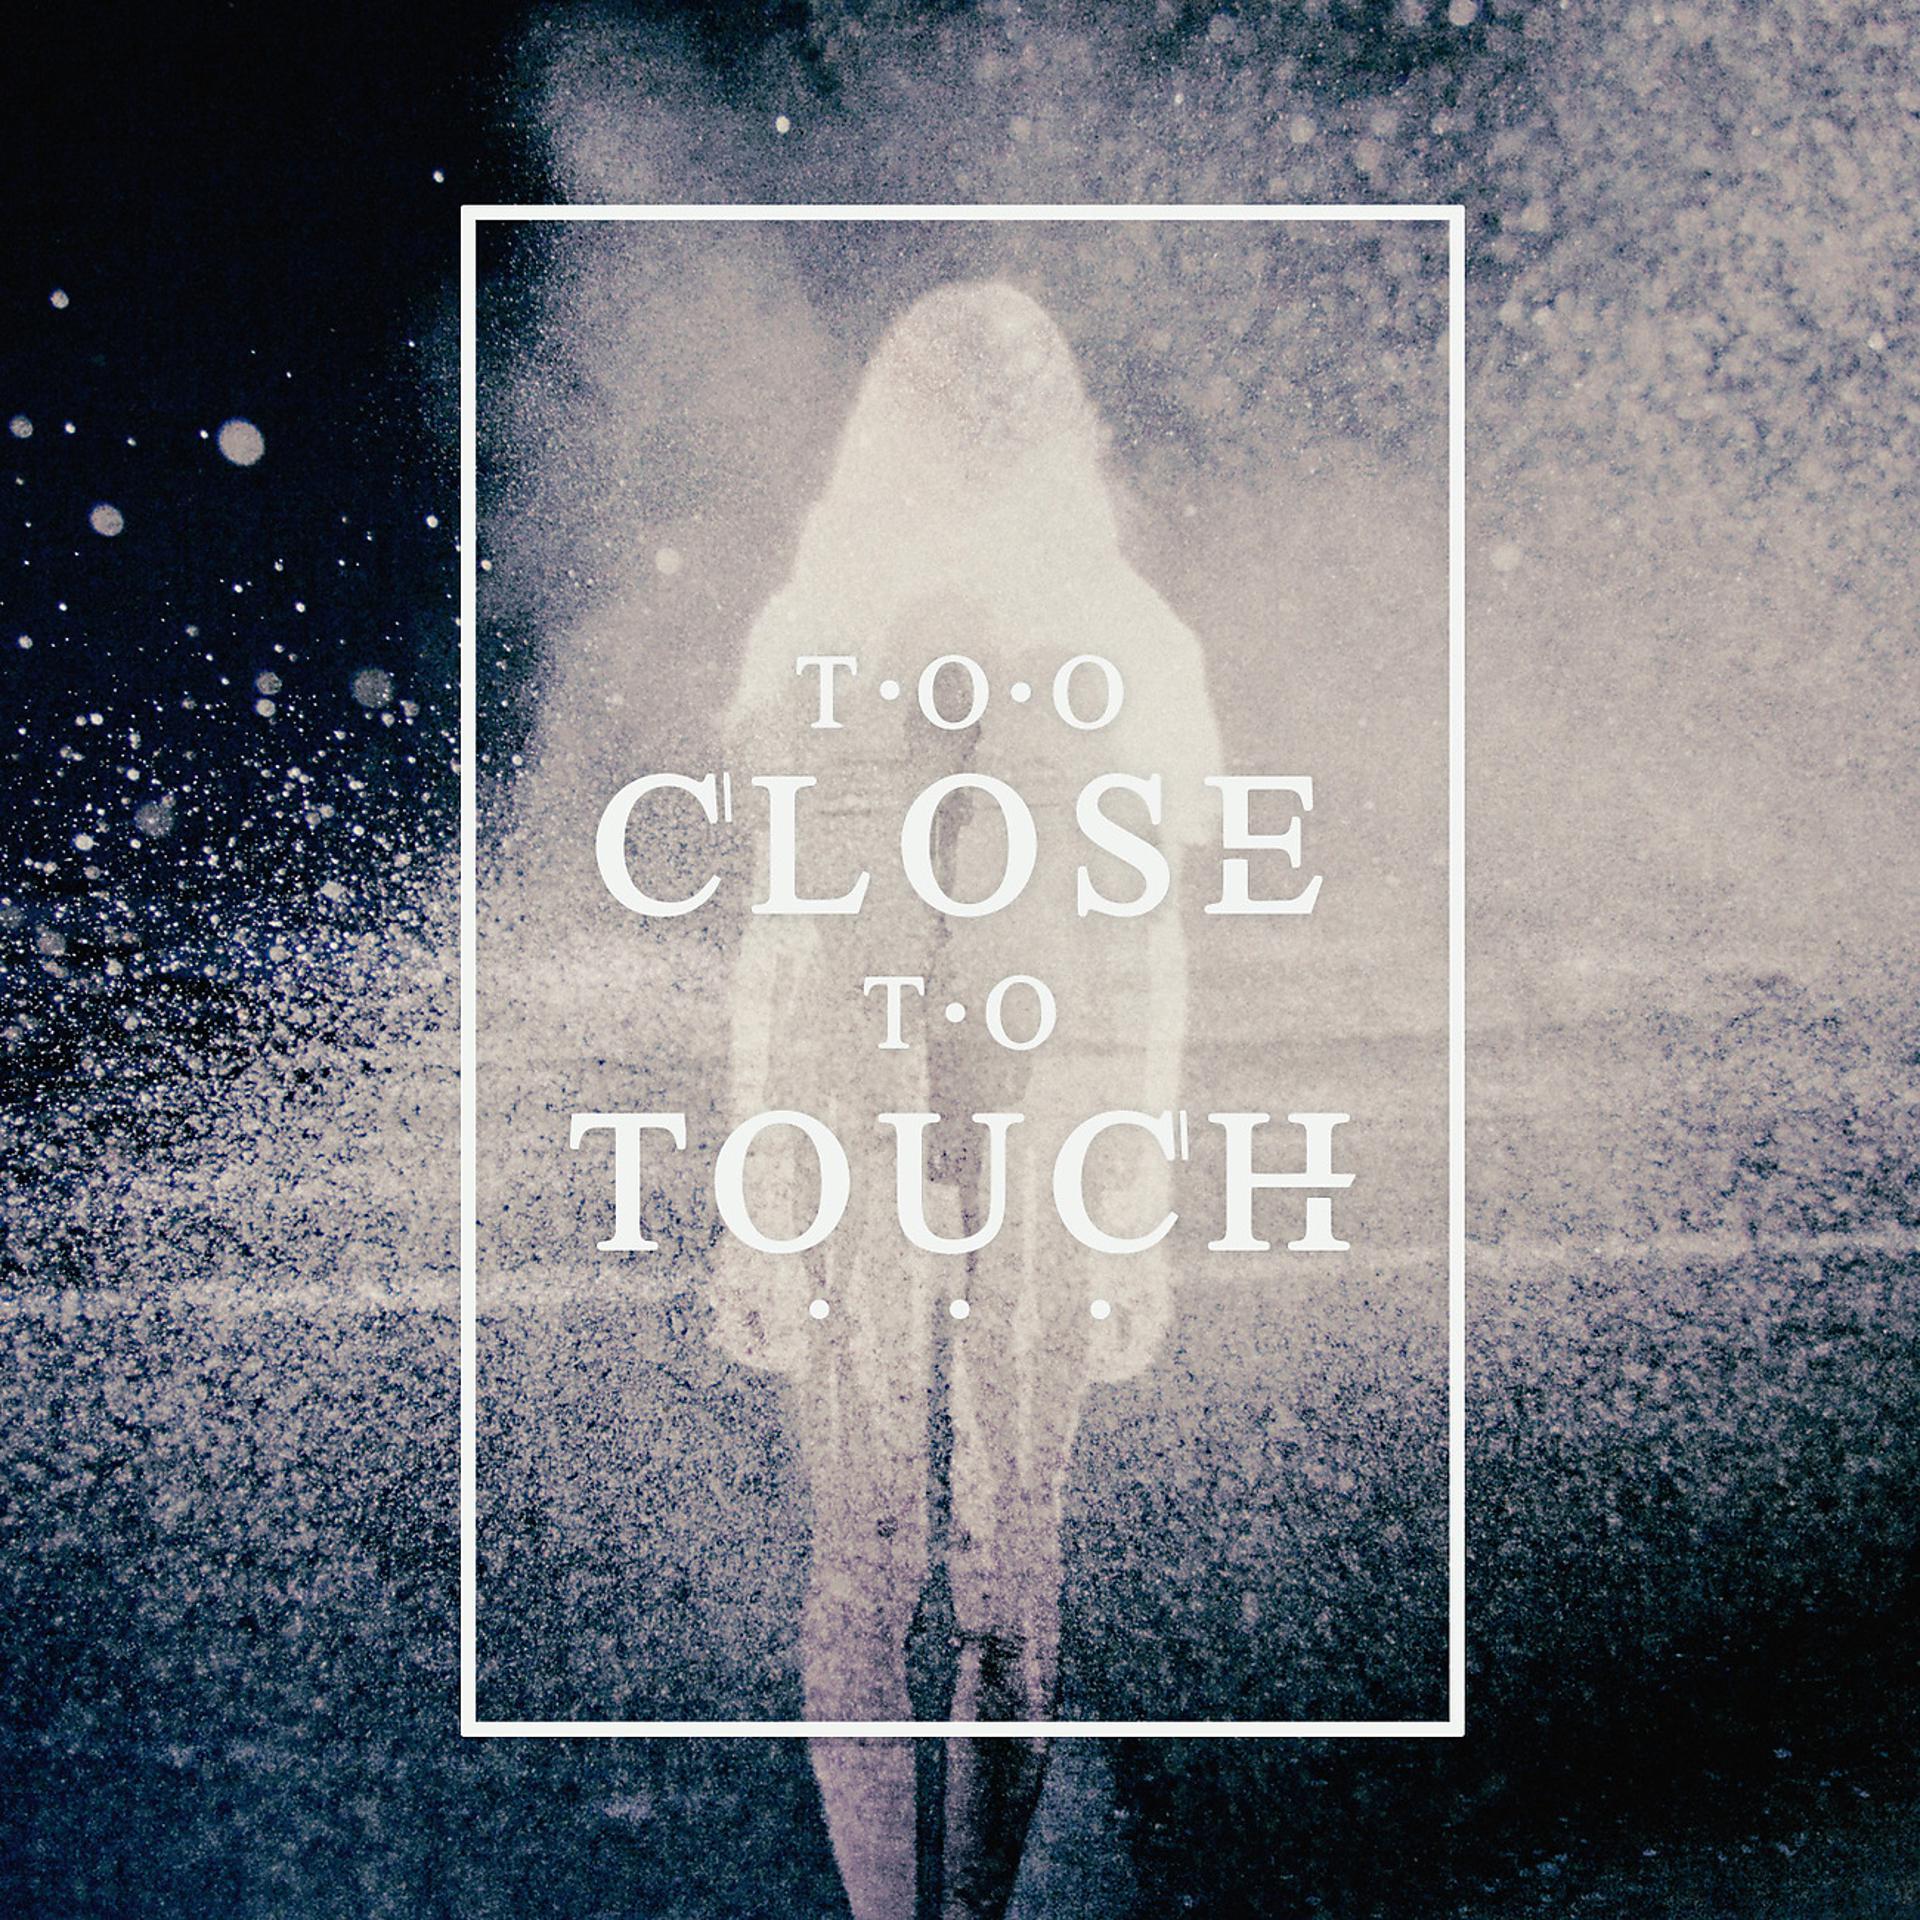 Closer to c. Too close to Touch. Too close to Touch album. Too close to Touch Sympathy. Китон Пирс too close to Touch.